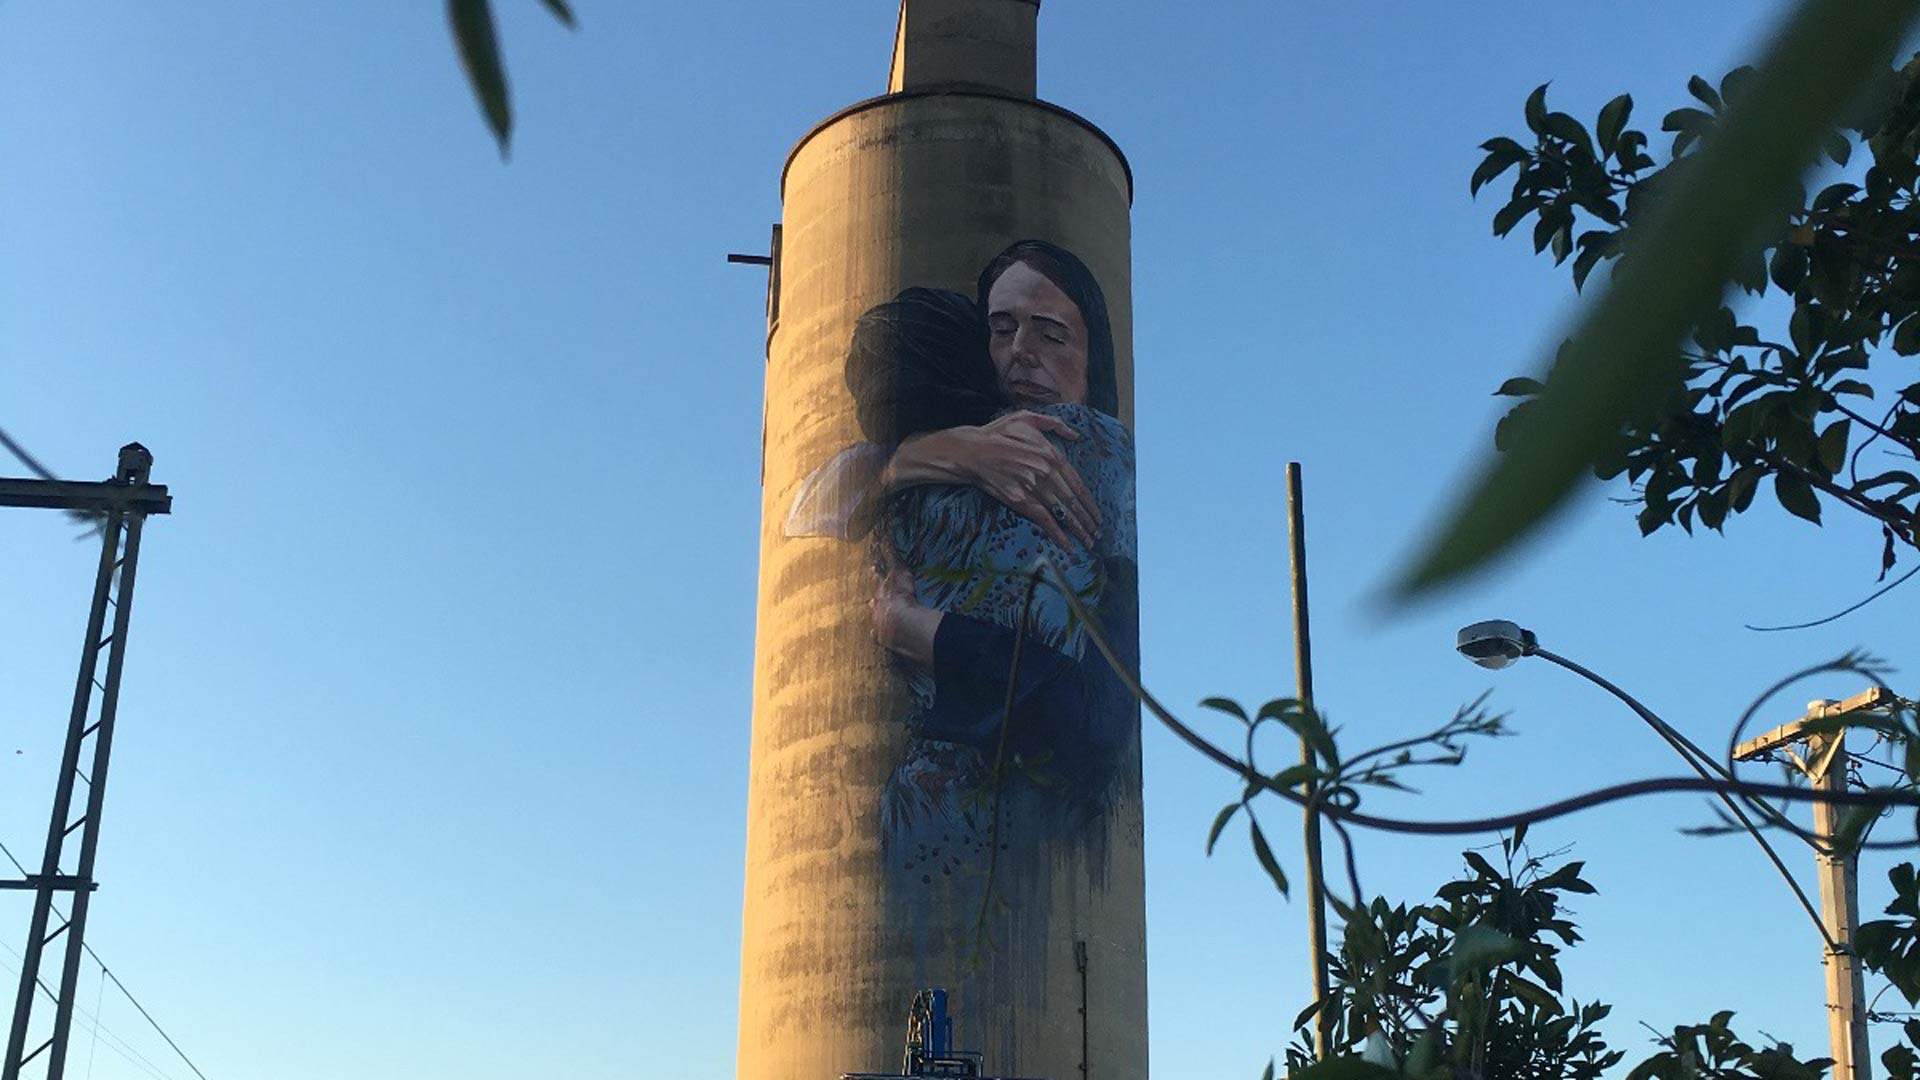 A Huge Mural of New Zealand Prime Minister Jacinda Ardern Is Now Gracing a Melbourne Silo